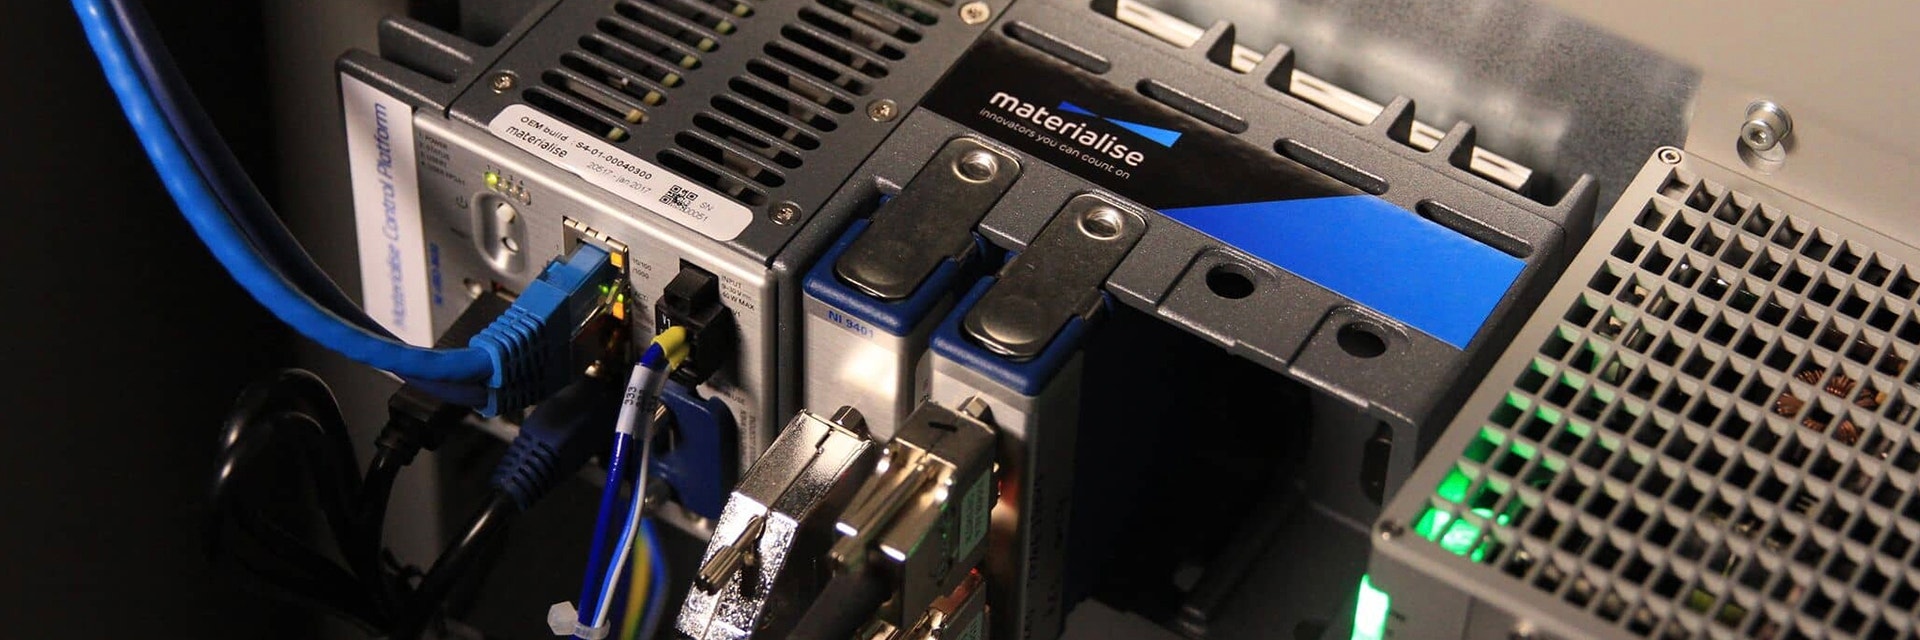 View of the Materialise Control Platform hardware plugged into a 3D printer